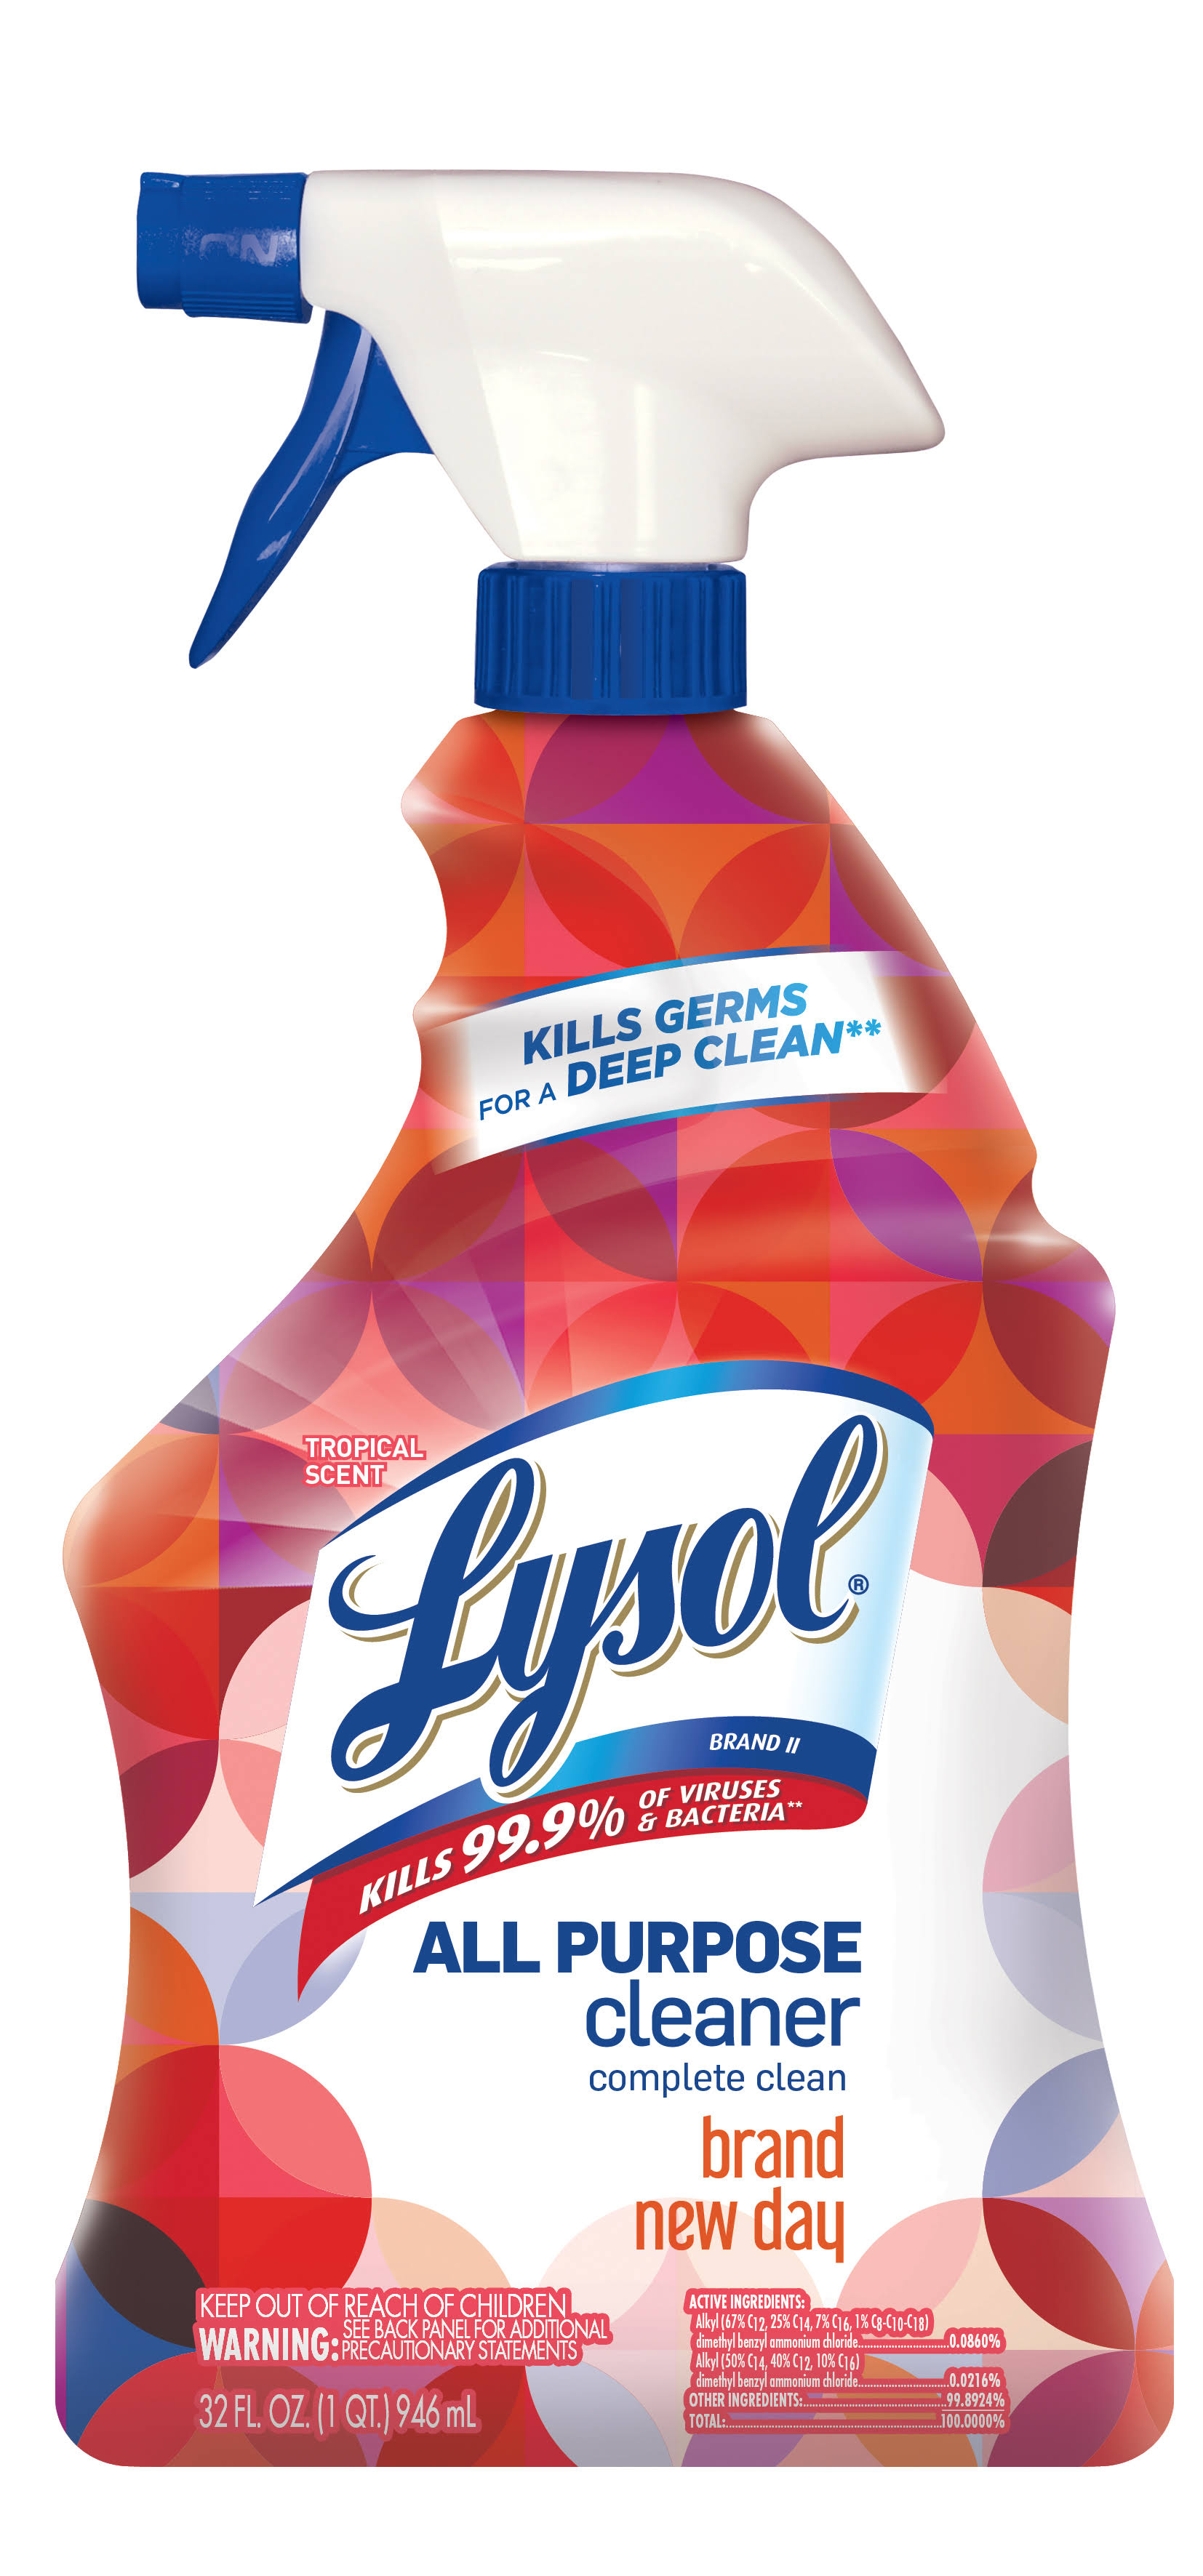 Lysol Brand New Day Household All Purpose Cleaner - 32oz